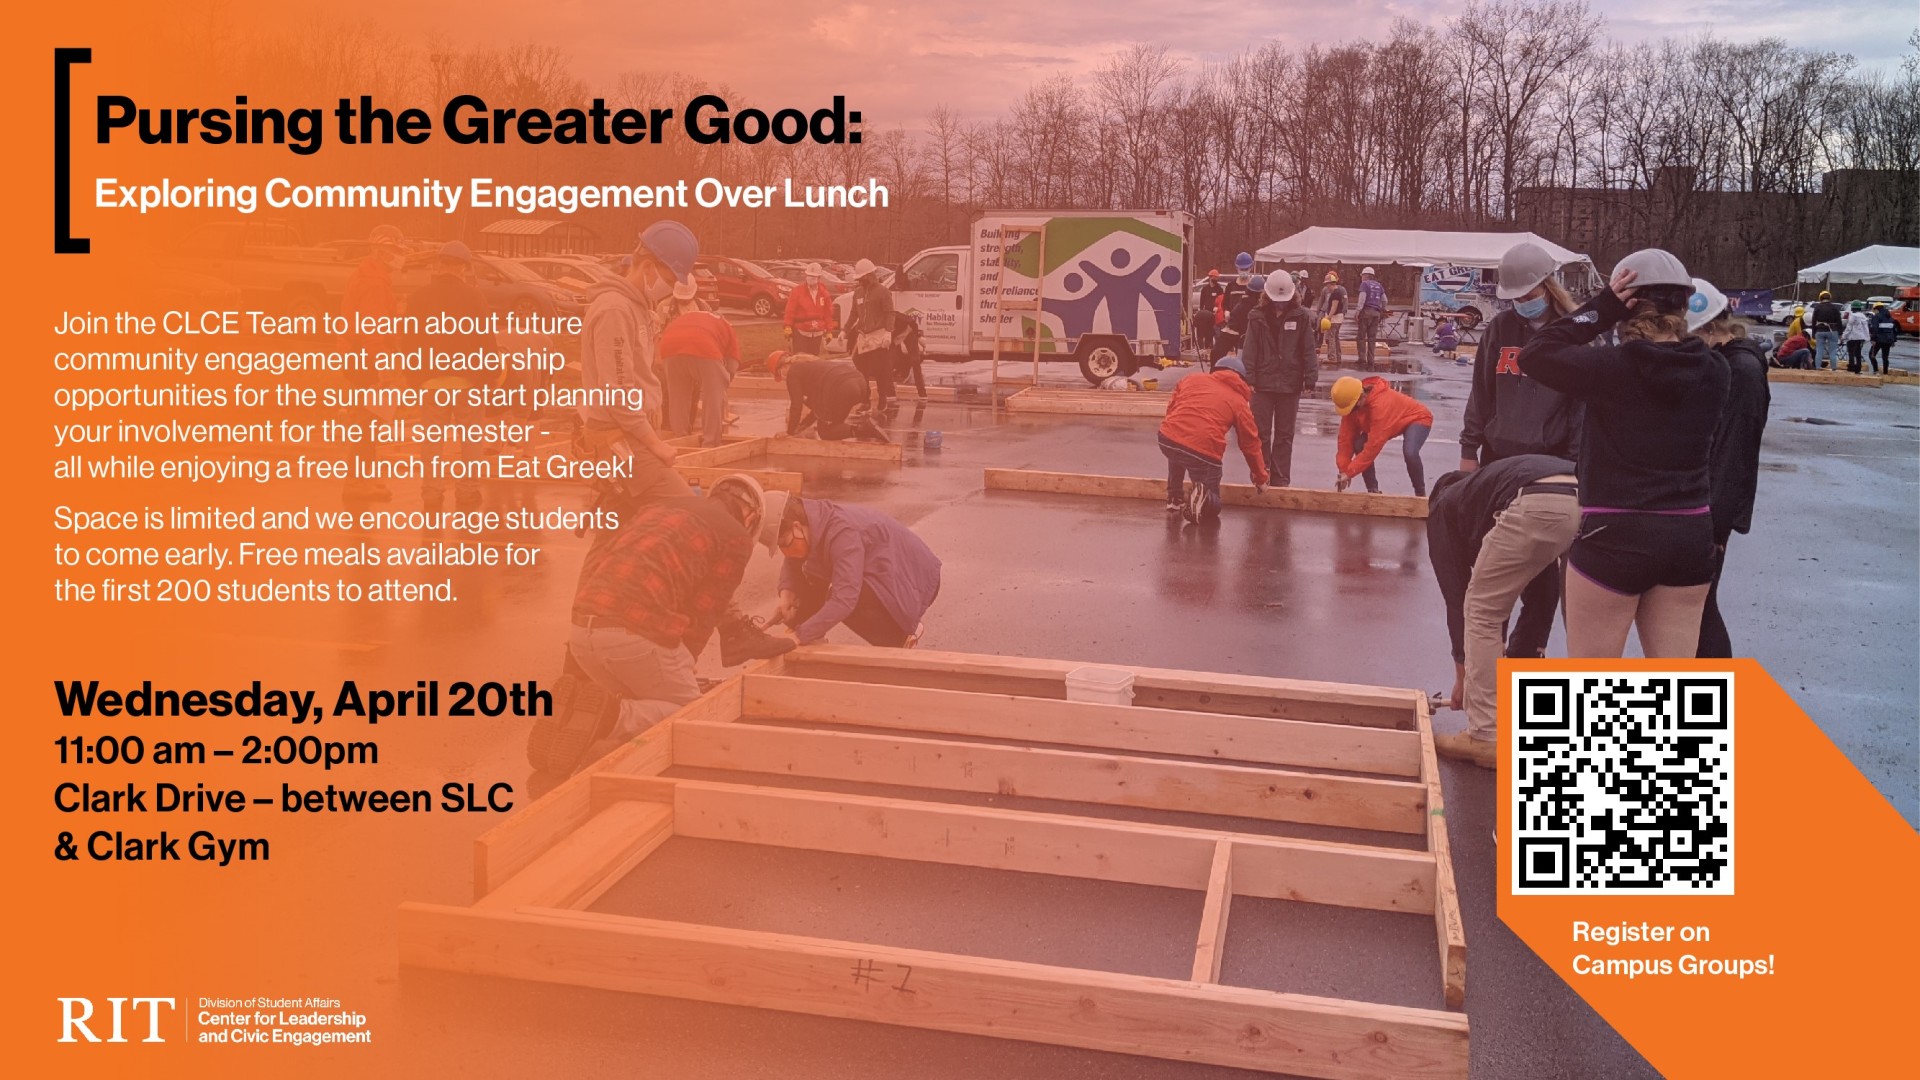 Pursing the Greater Good: Exploring Community Engagement Over Lunch